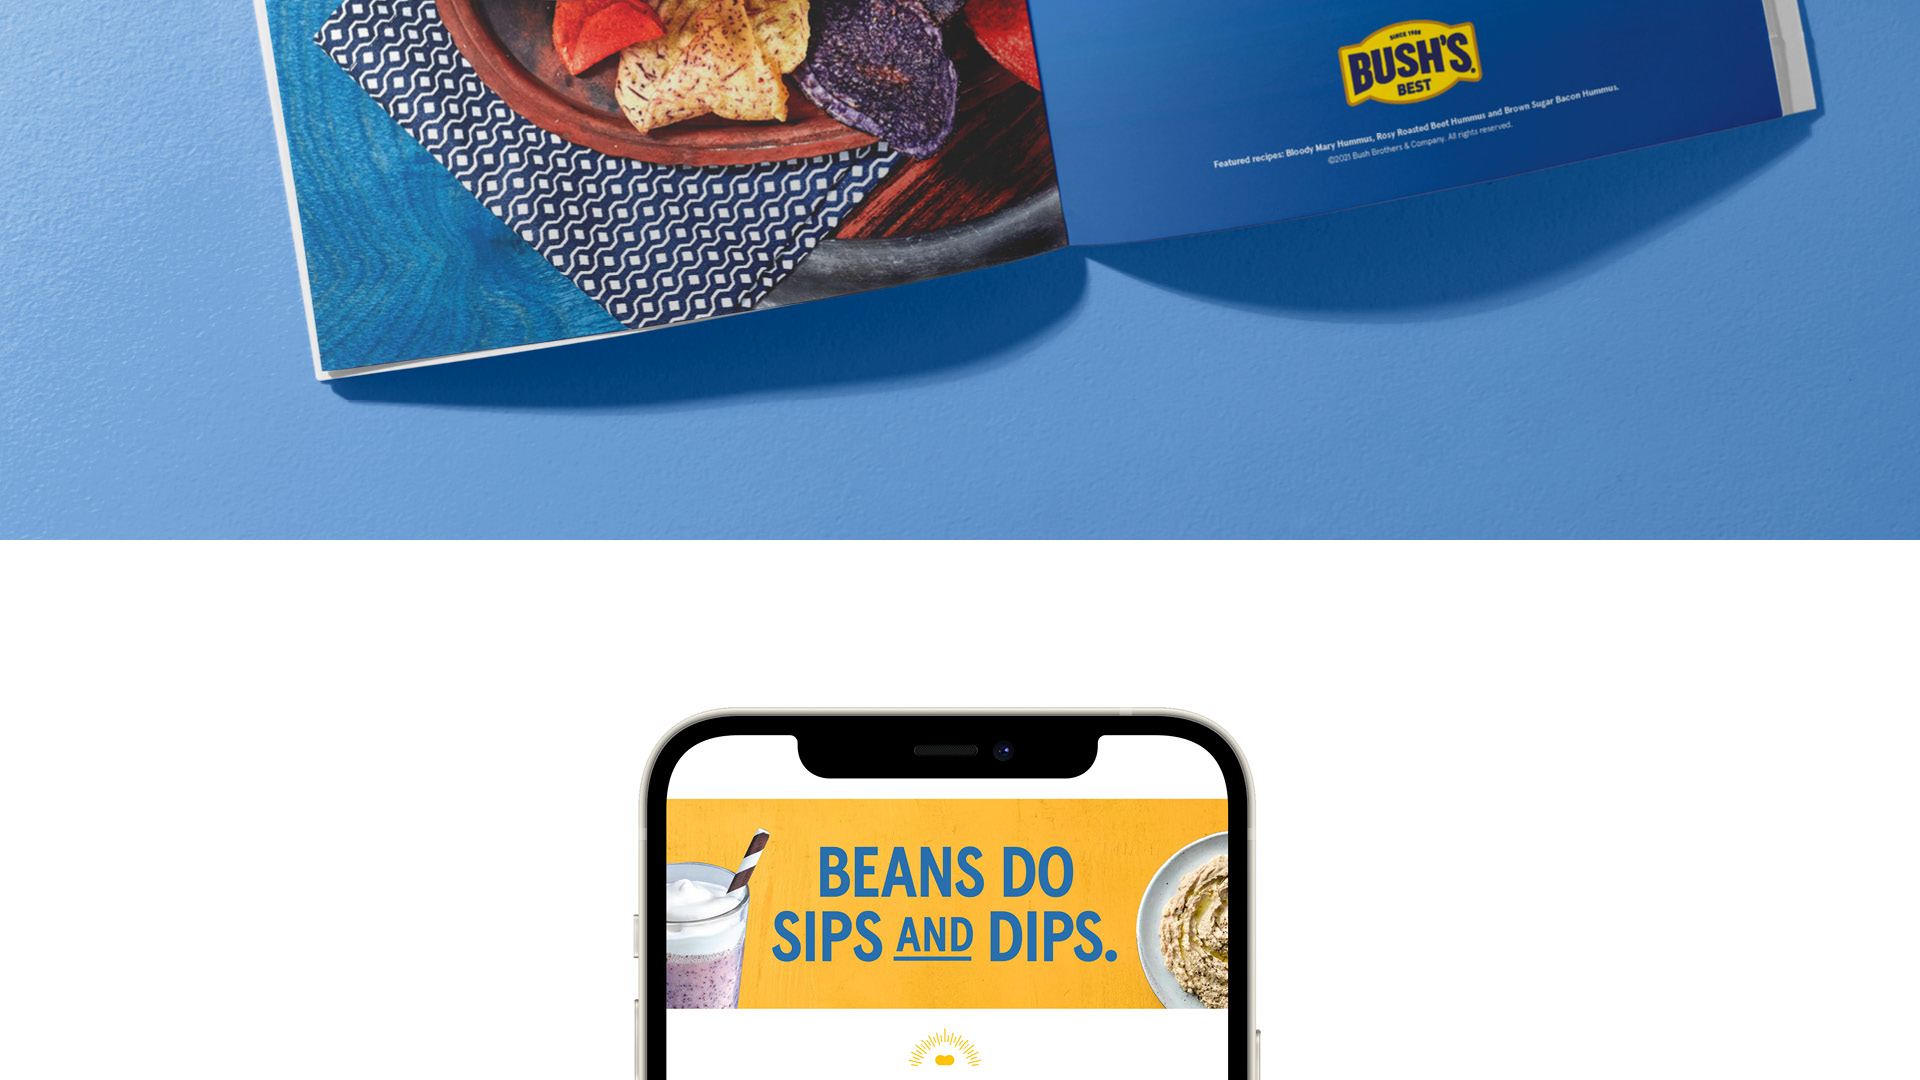 The bottom portion of a brochure, and the top portion of a cell phone screen that says "Beans do sips and dips."